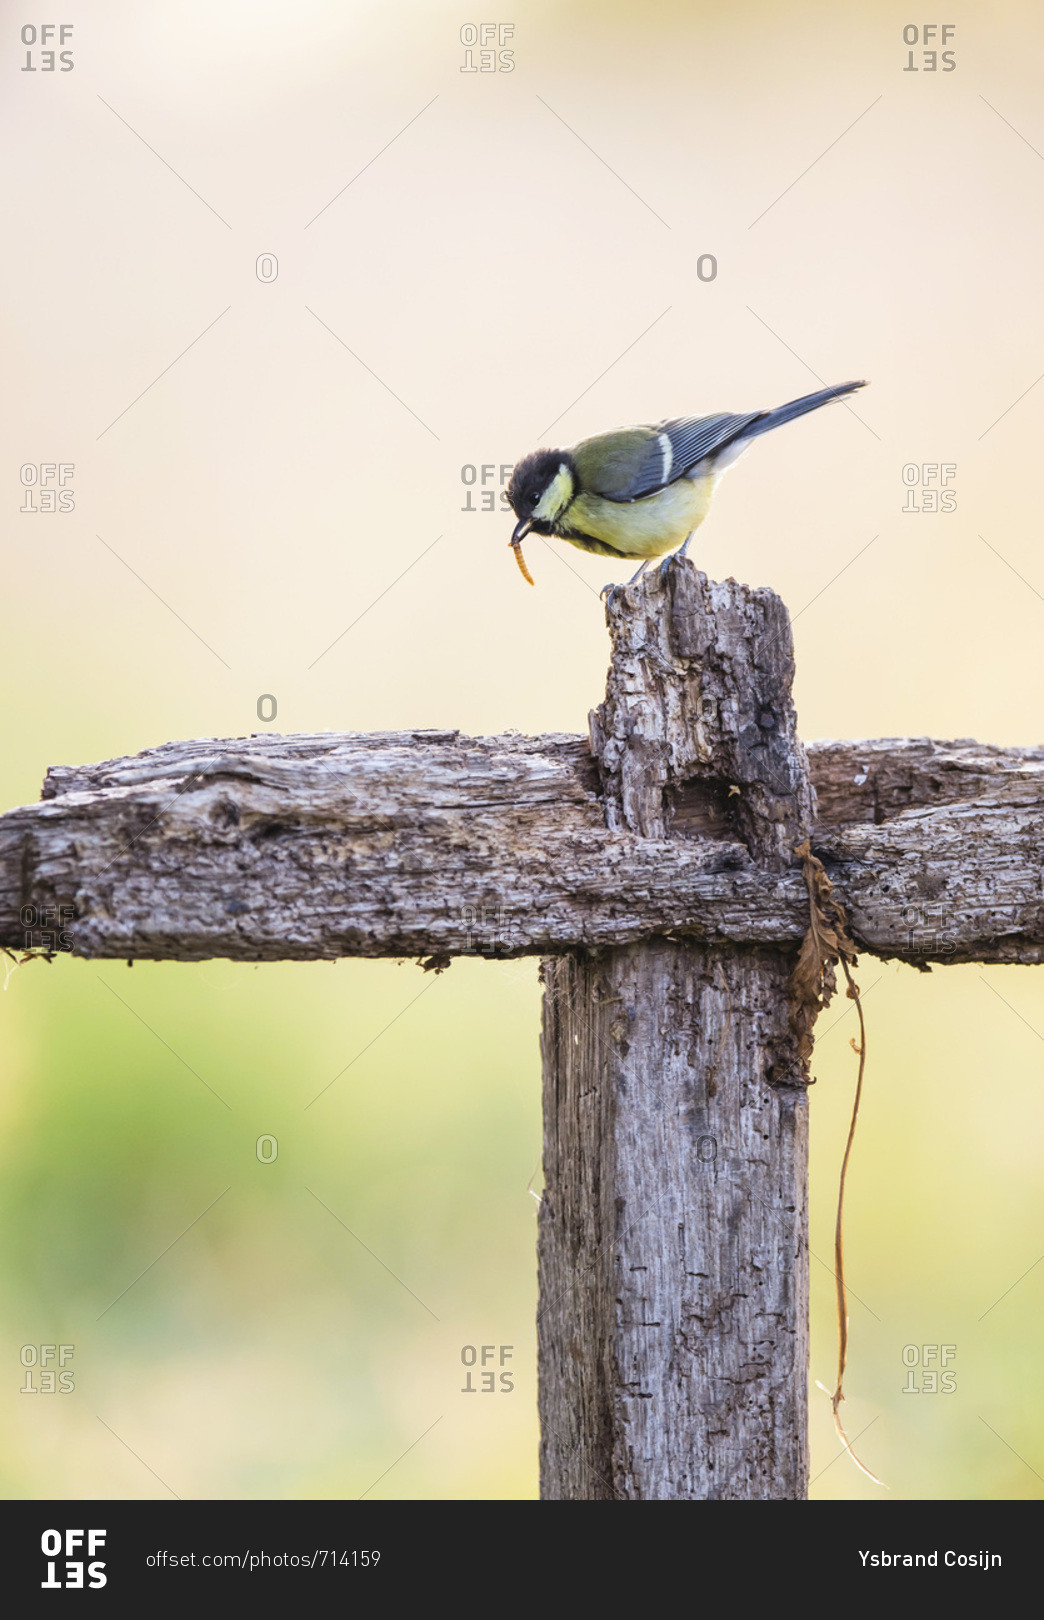 Bird eating small insect on farm fence